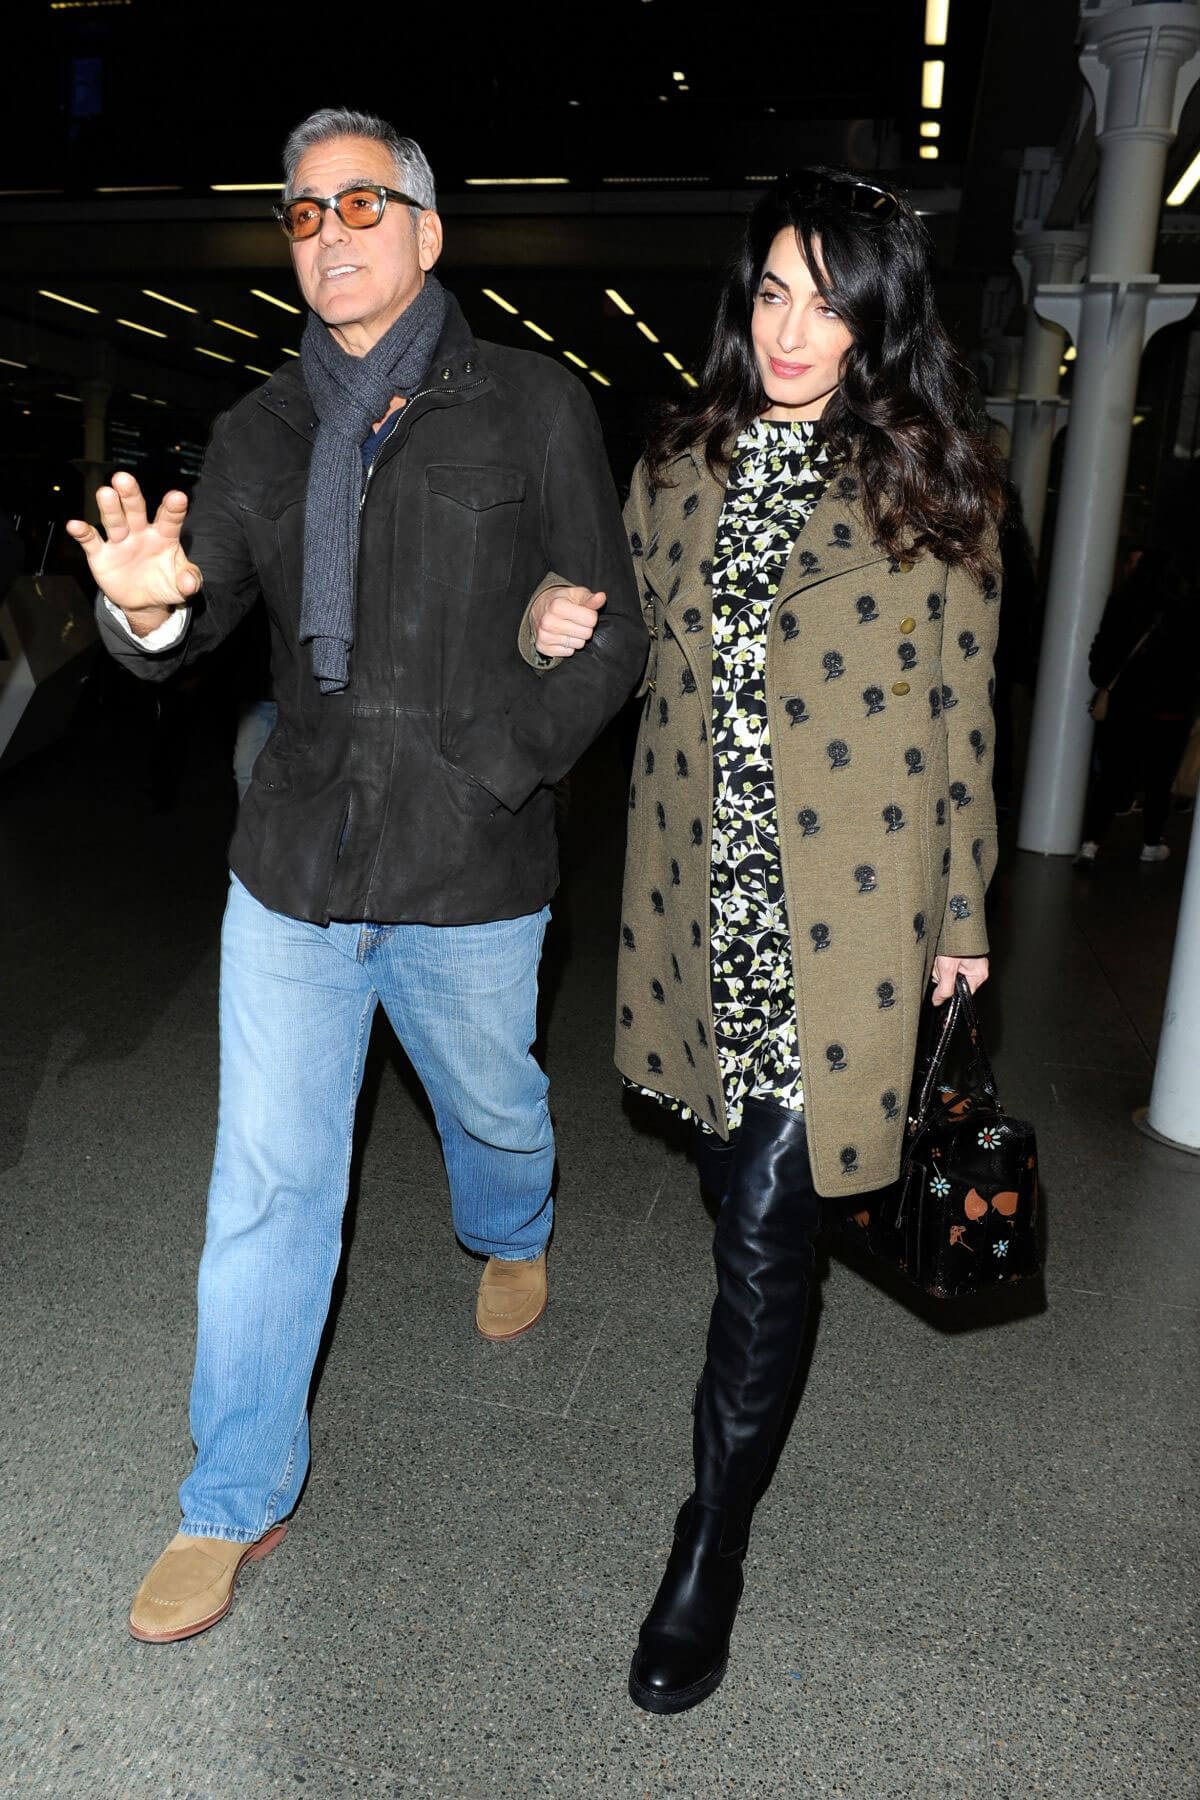 Amal Clooney and George Clooney at St Pancras Eurostar in London 8